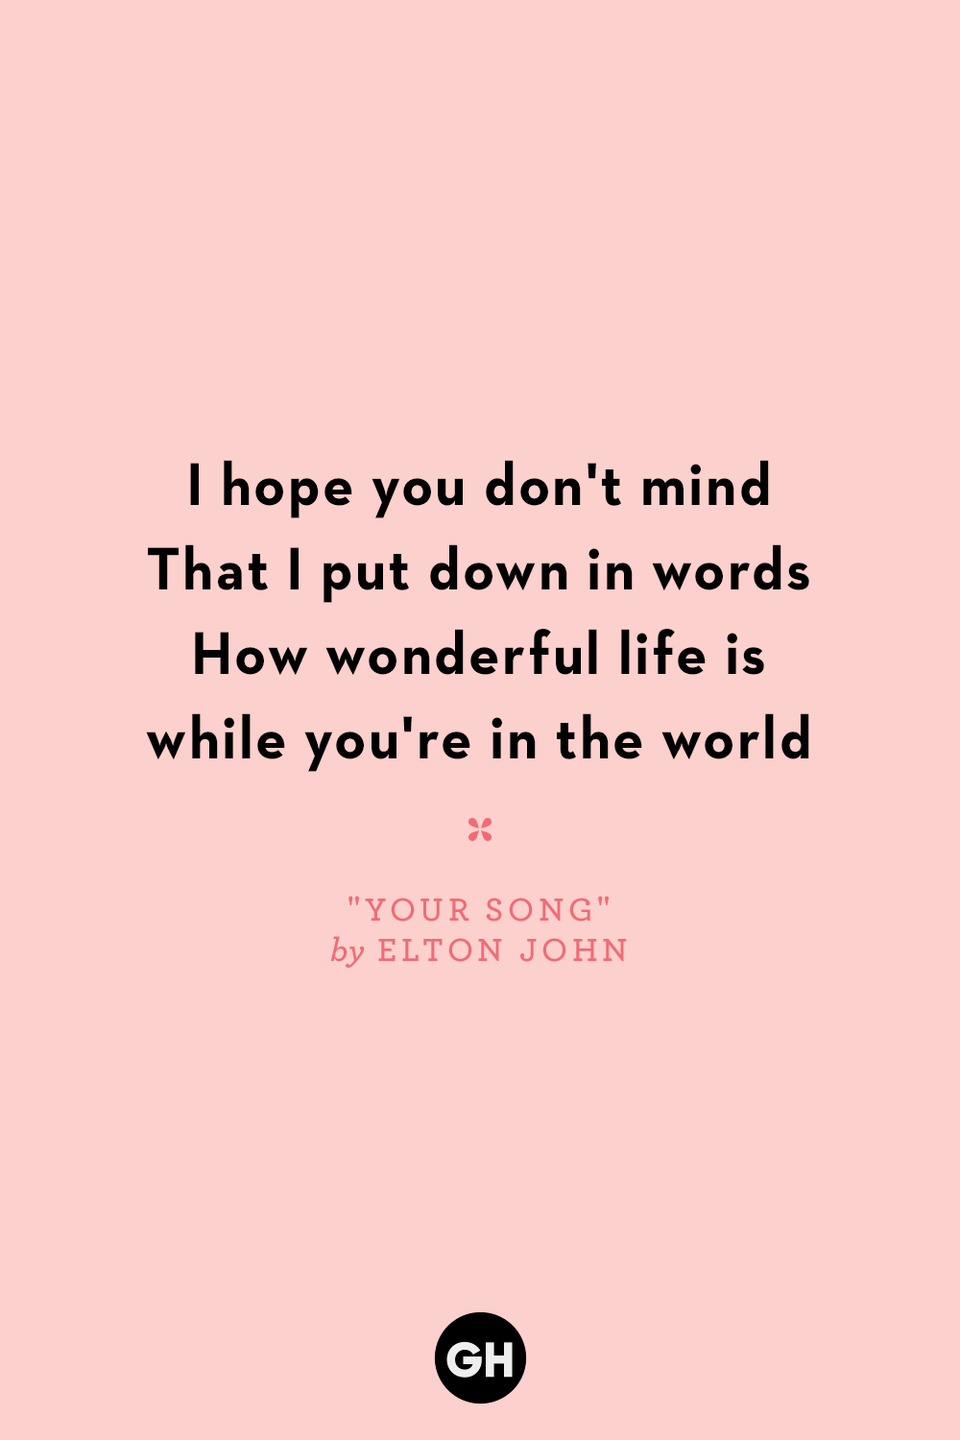 "Your Song" by Elton John